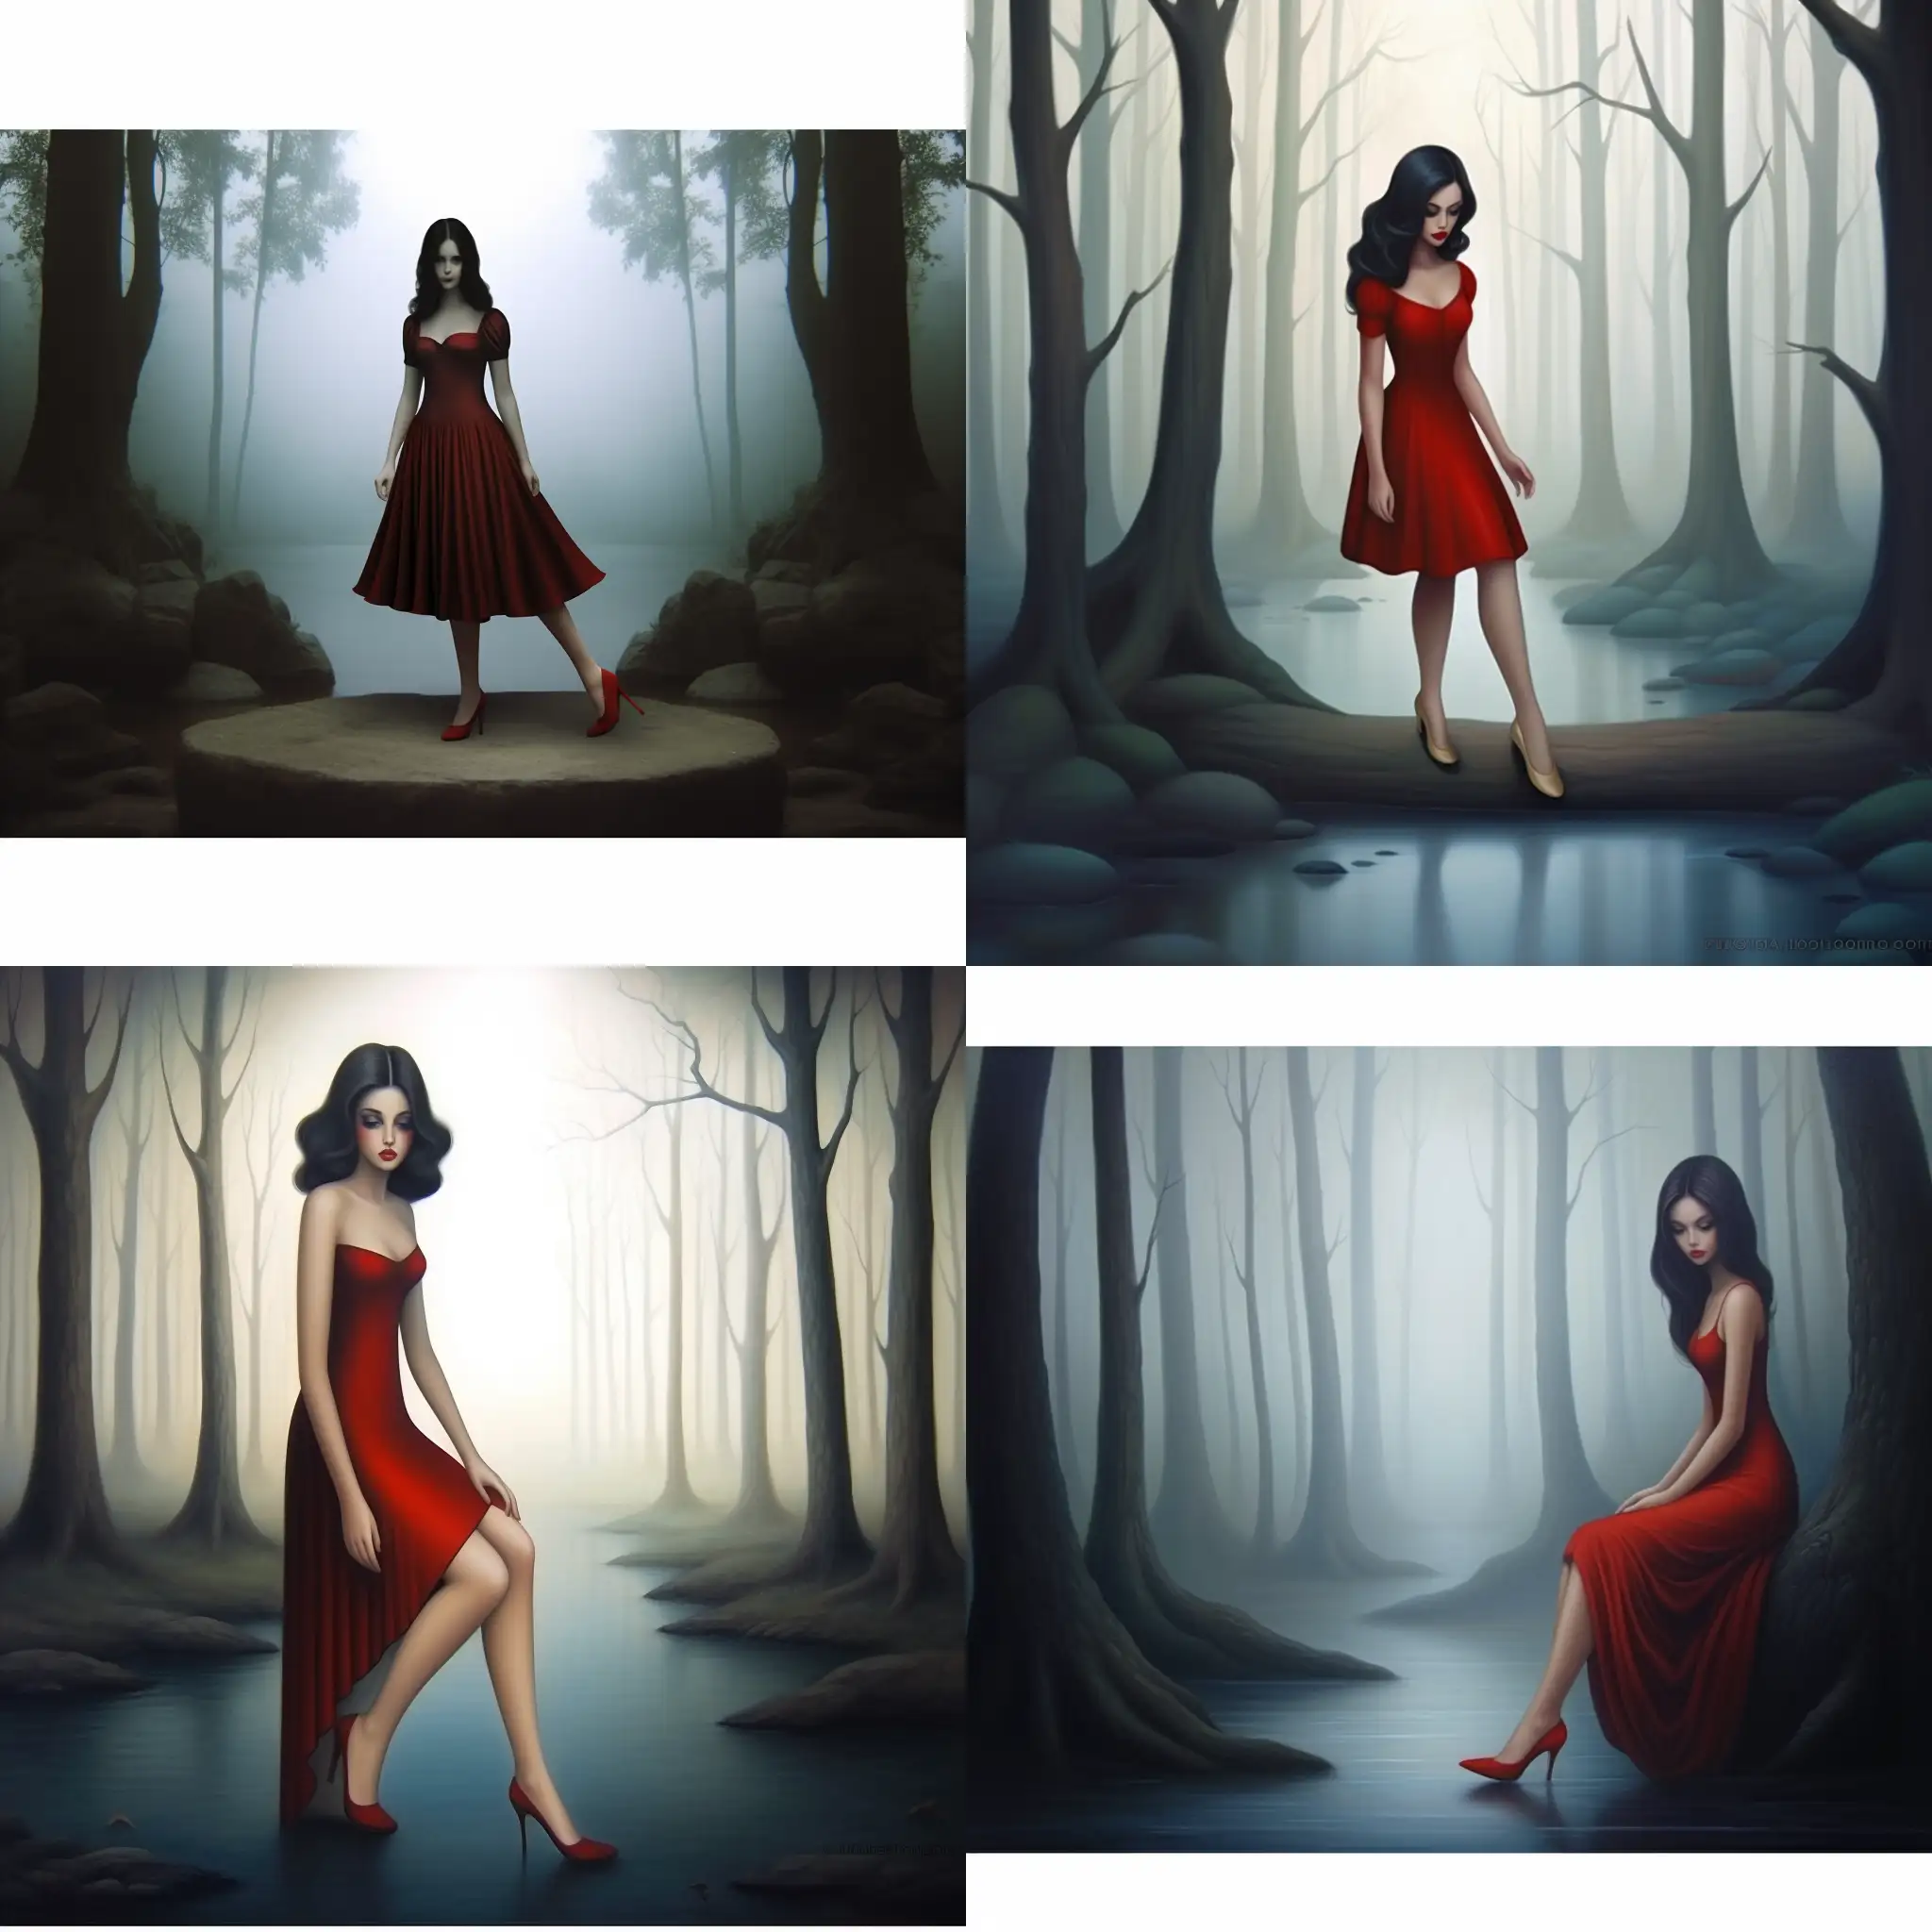 Elegant-Young-Woman-in-Red-Dress-and-Shoes-Fashion-Portrait